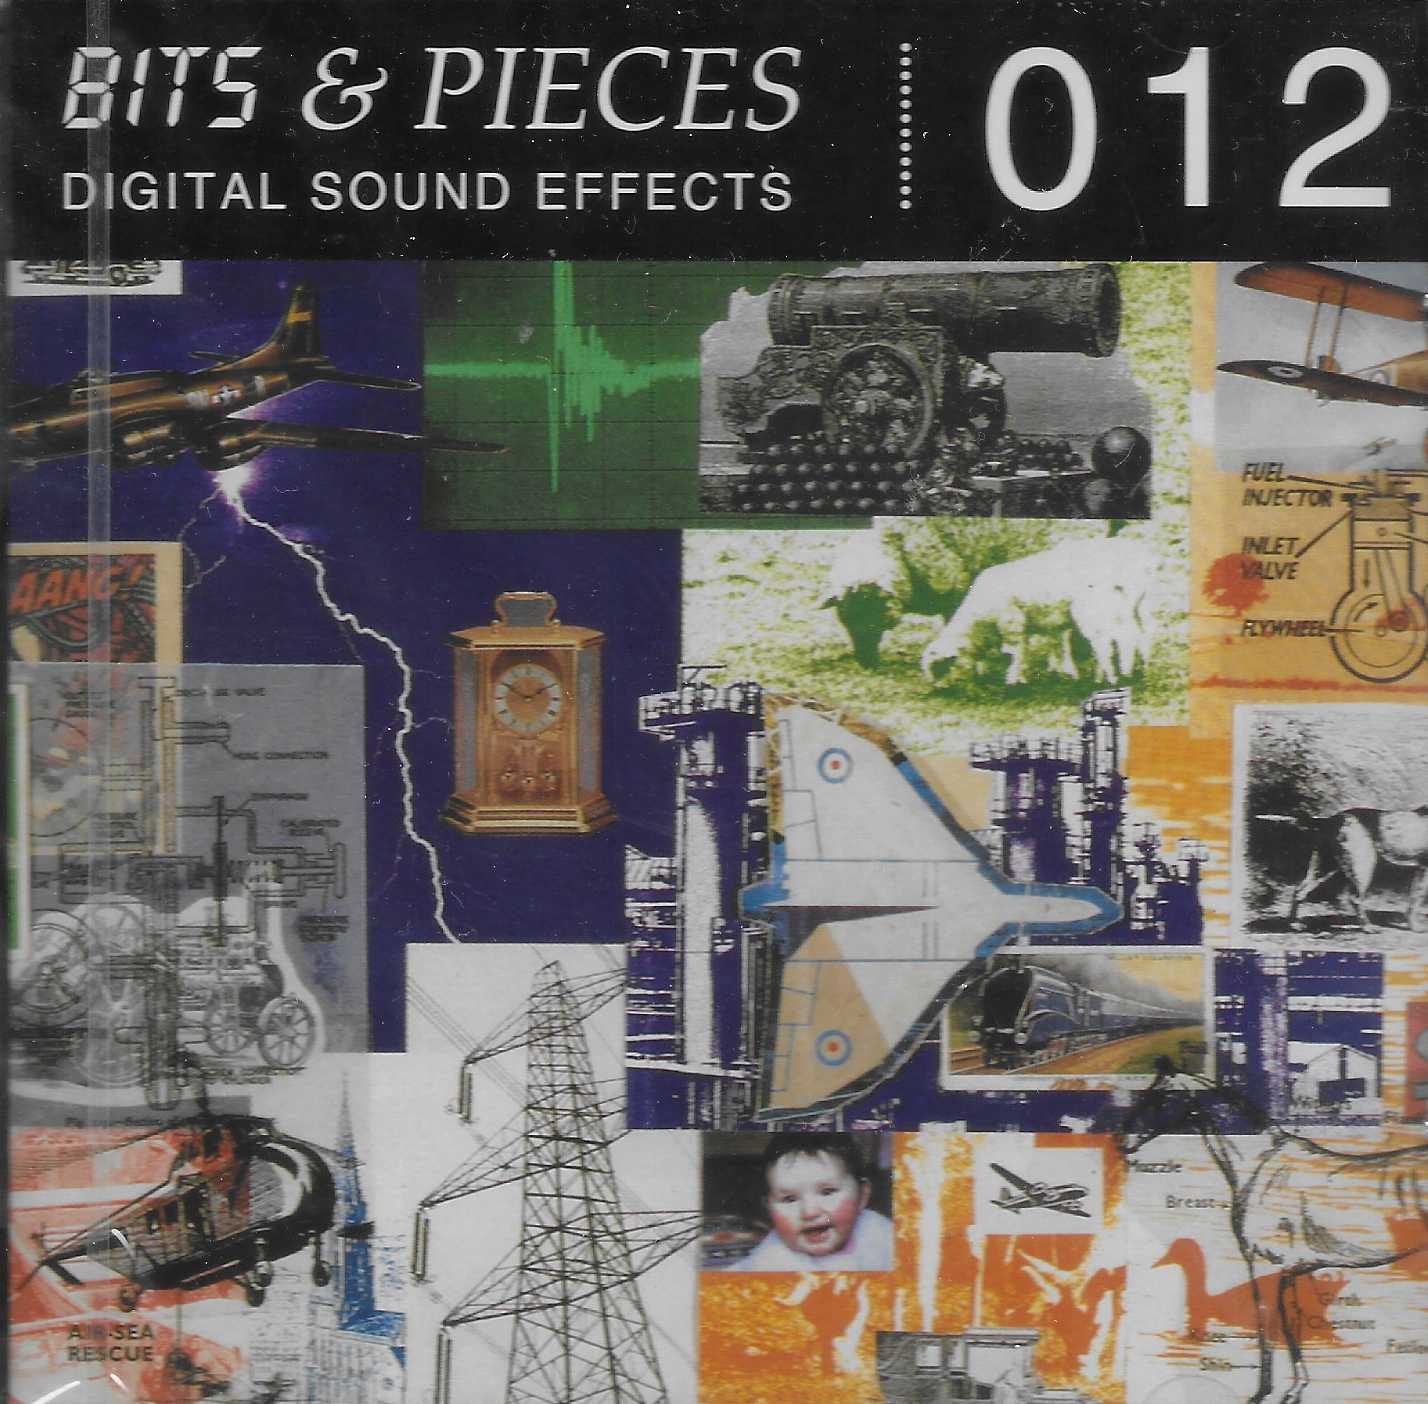 Picture of BITS 012 Bits & pieces digital sound effects 012 by artist Various from ITV, Channel 4 and Channel 5 library